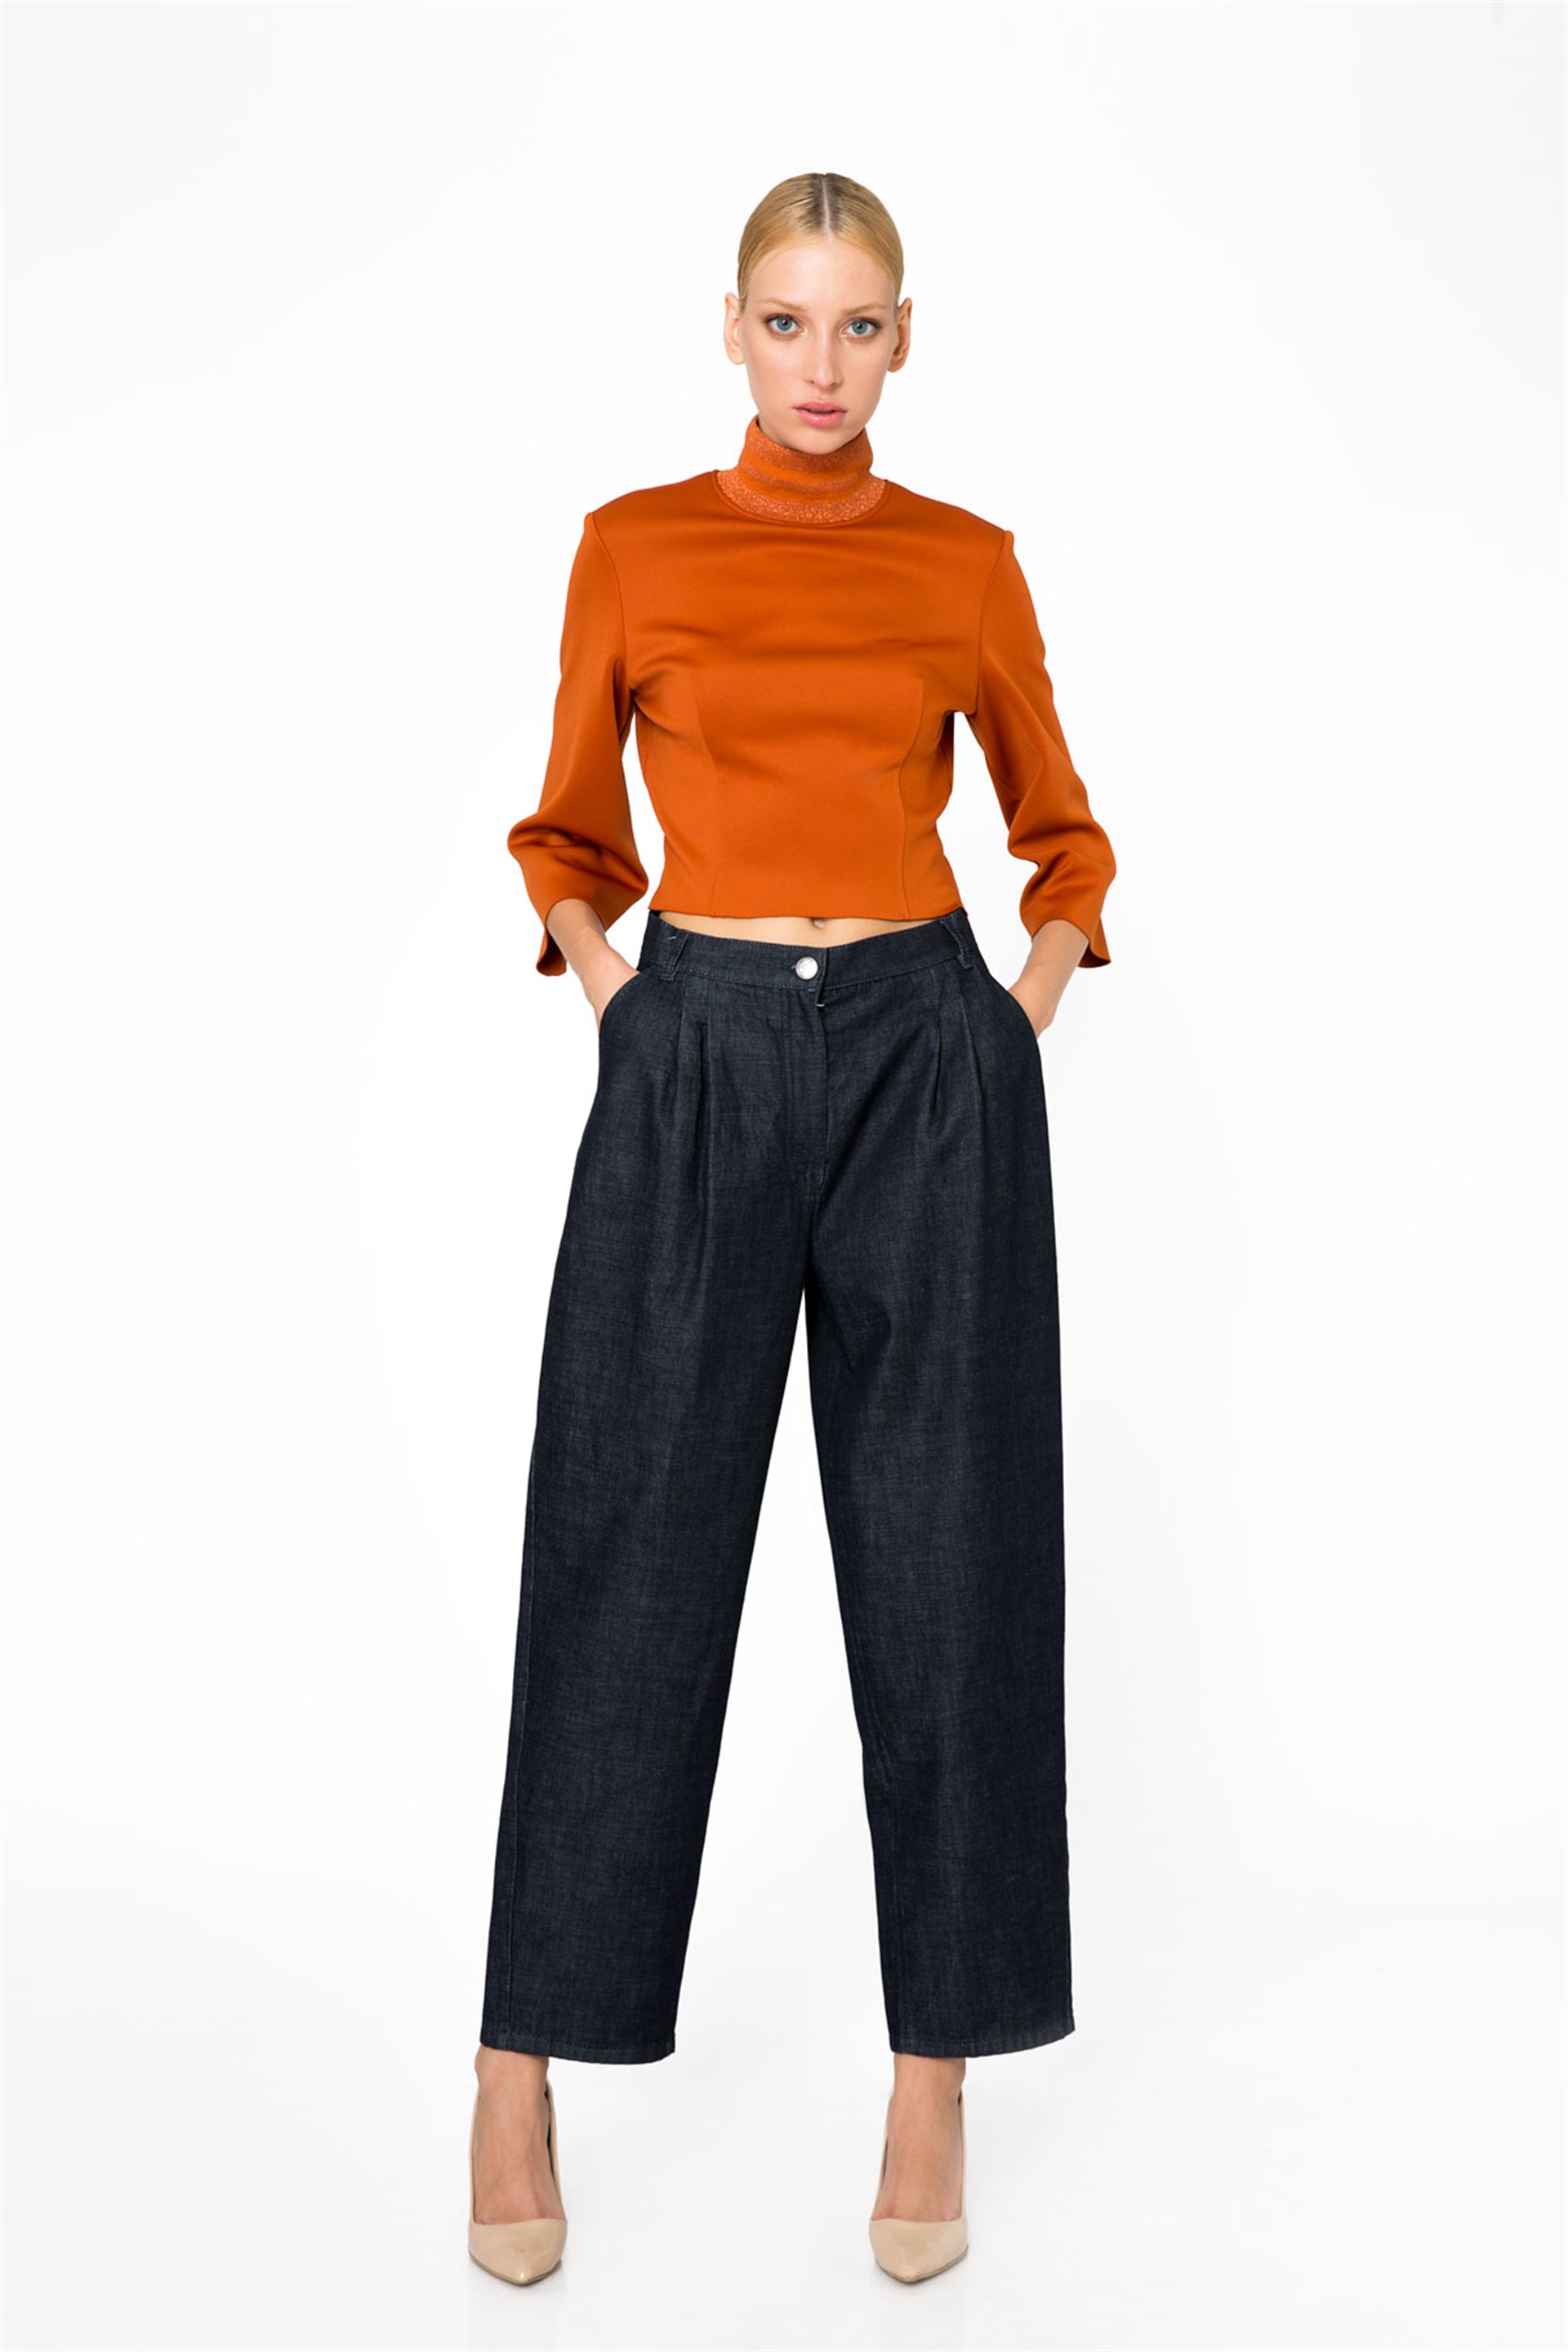 Outlet Wholesale Women's Trouser Models And Price | Gizia Wholesale